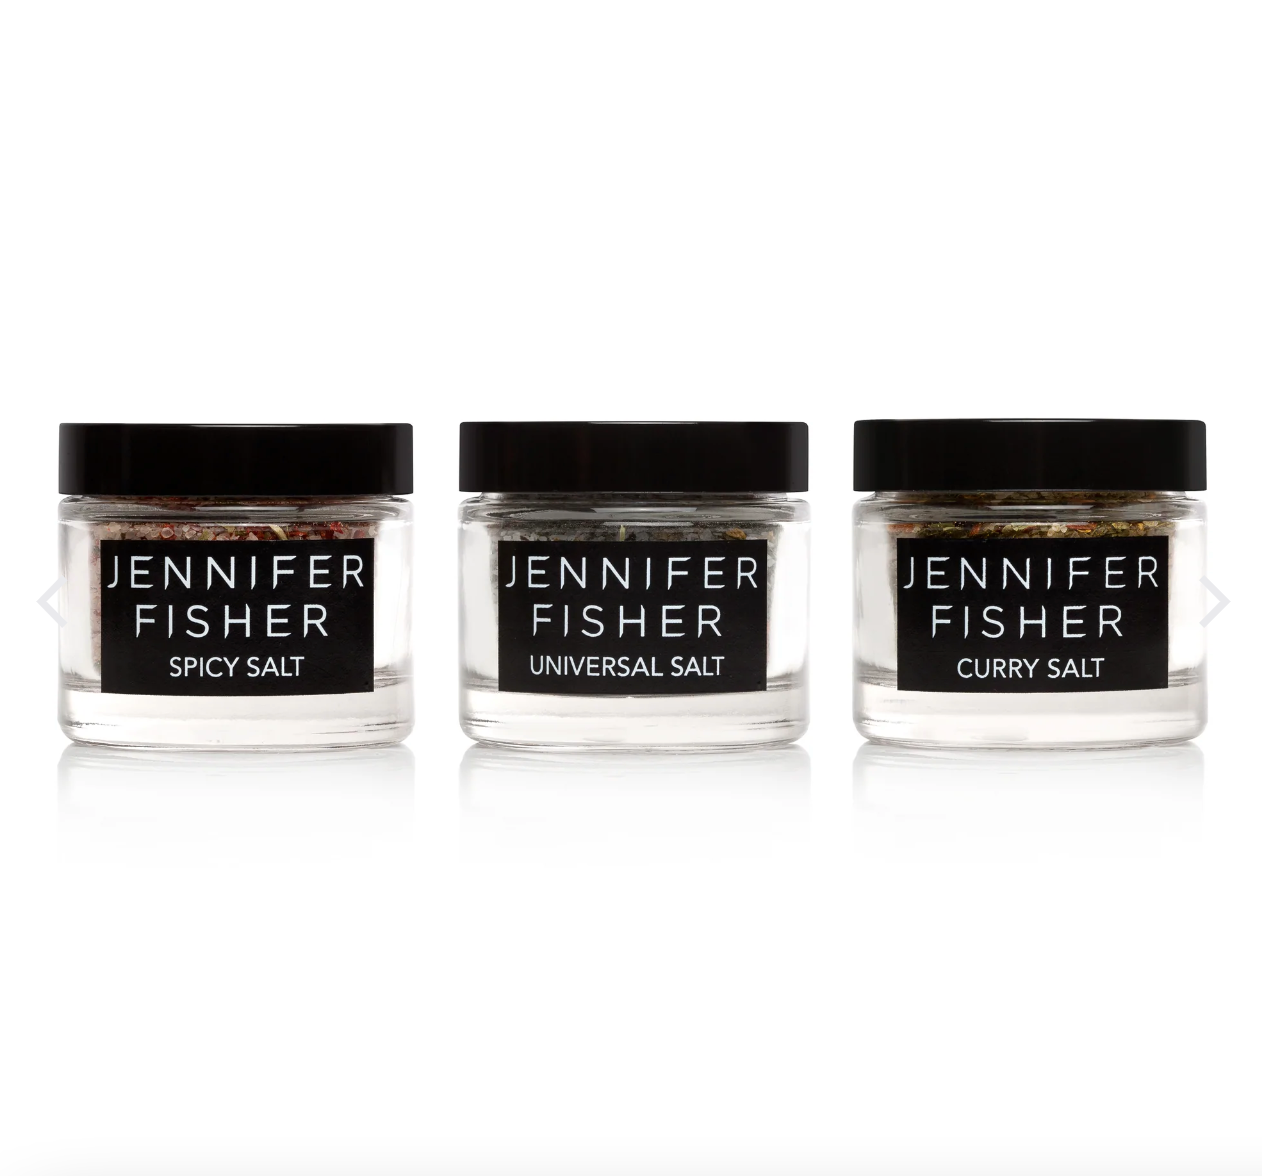 Jennifer Fisher Salts - You'll likely get rid of all your other spices when you try these!